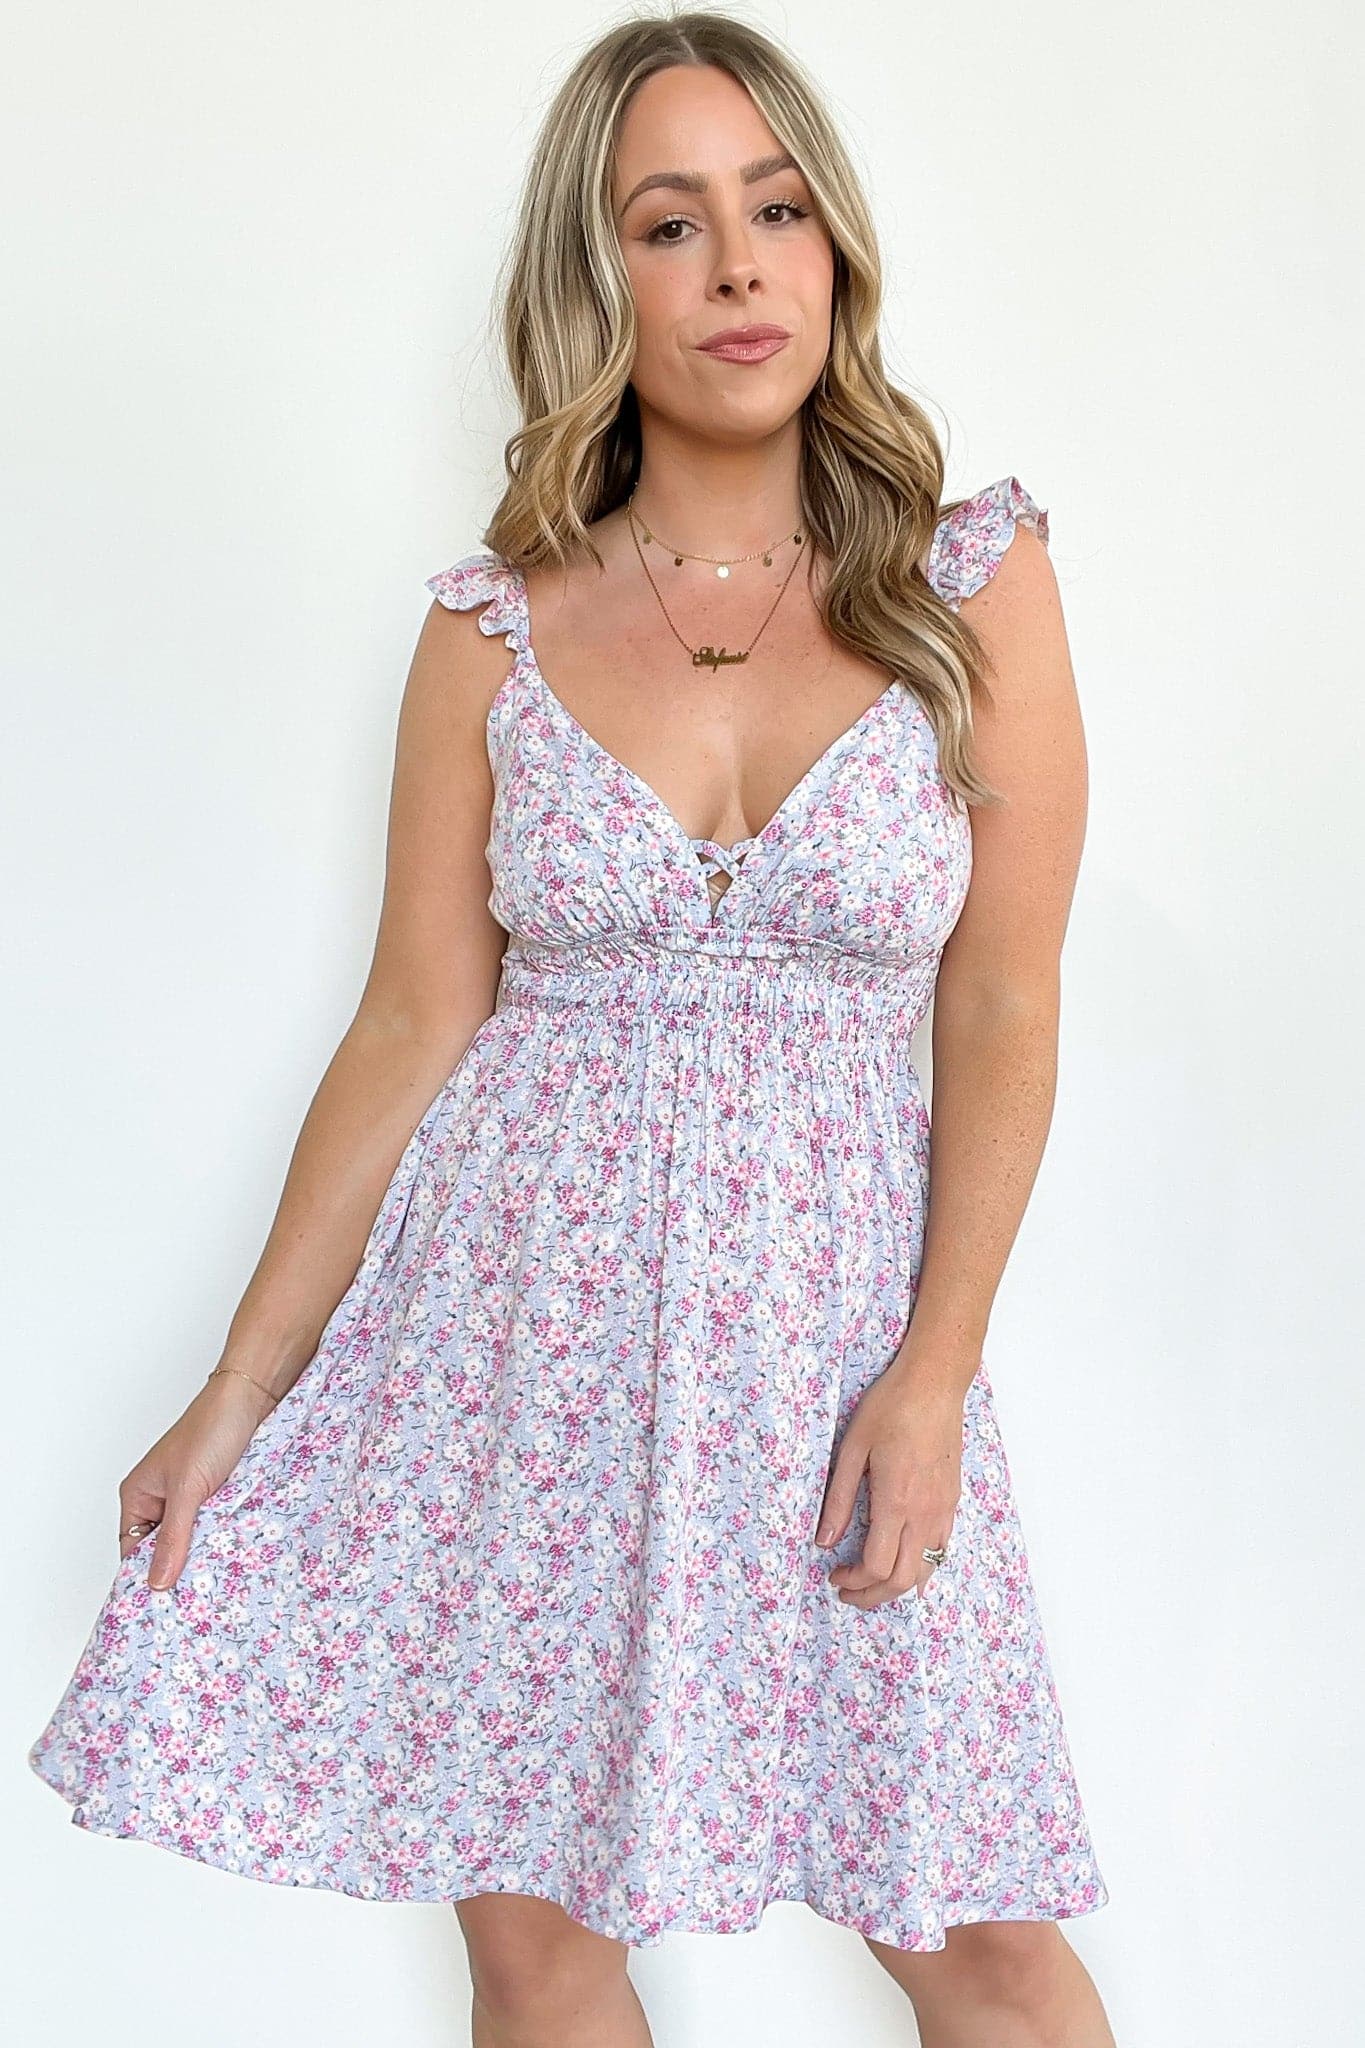  Desti Floral Ruffle Smocked Dress | CURVE - FINAL SALE - Madison and Mallory